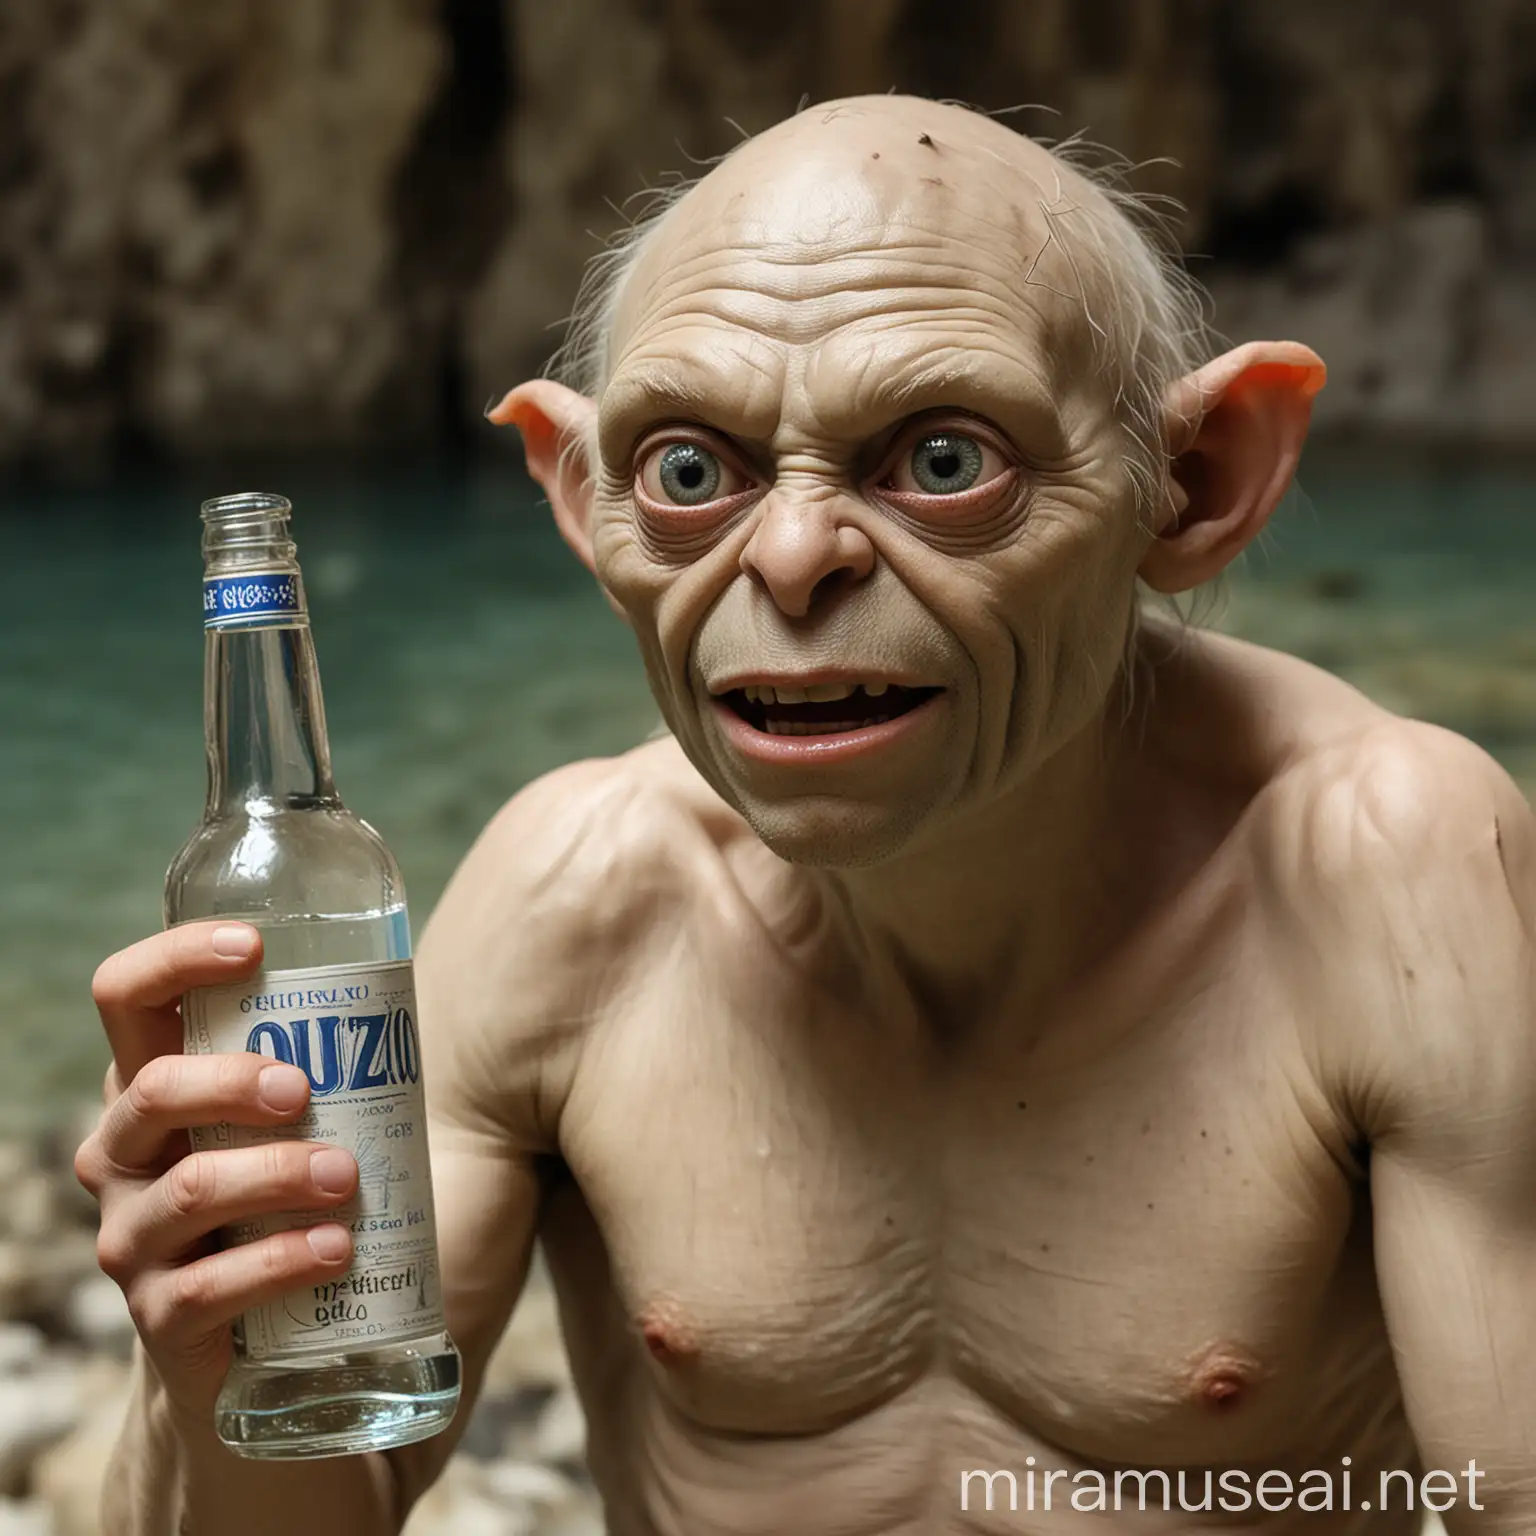 Golum holding a bottle of ouzo and saying "my precious"